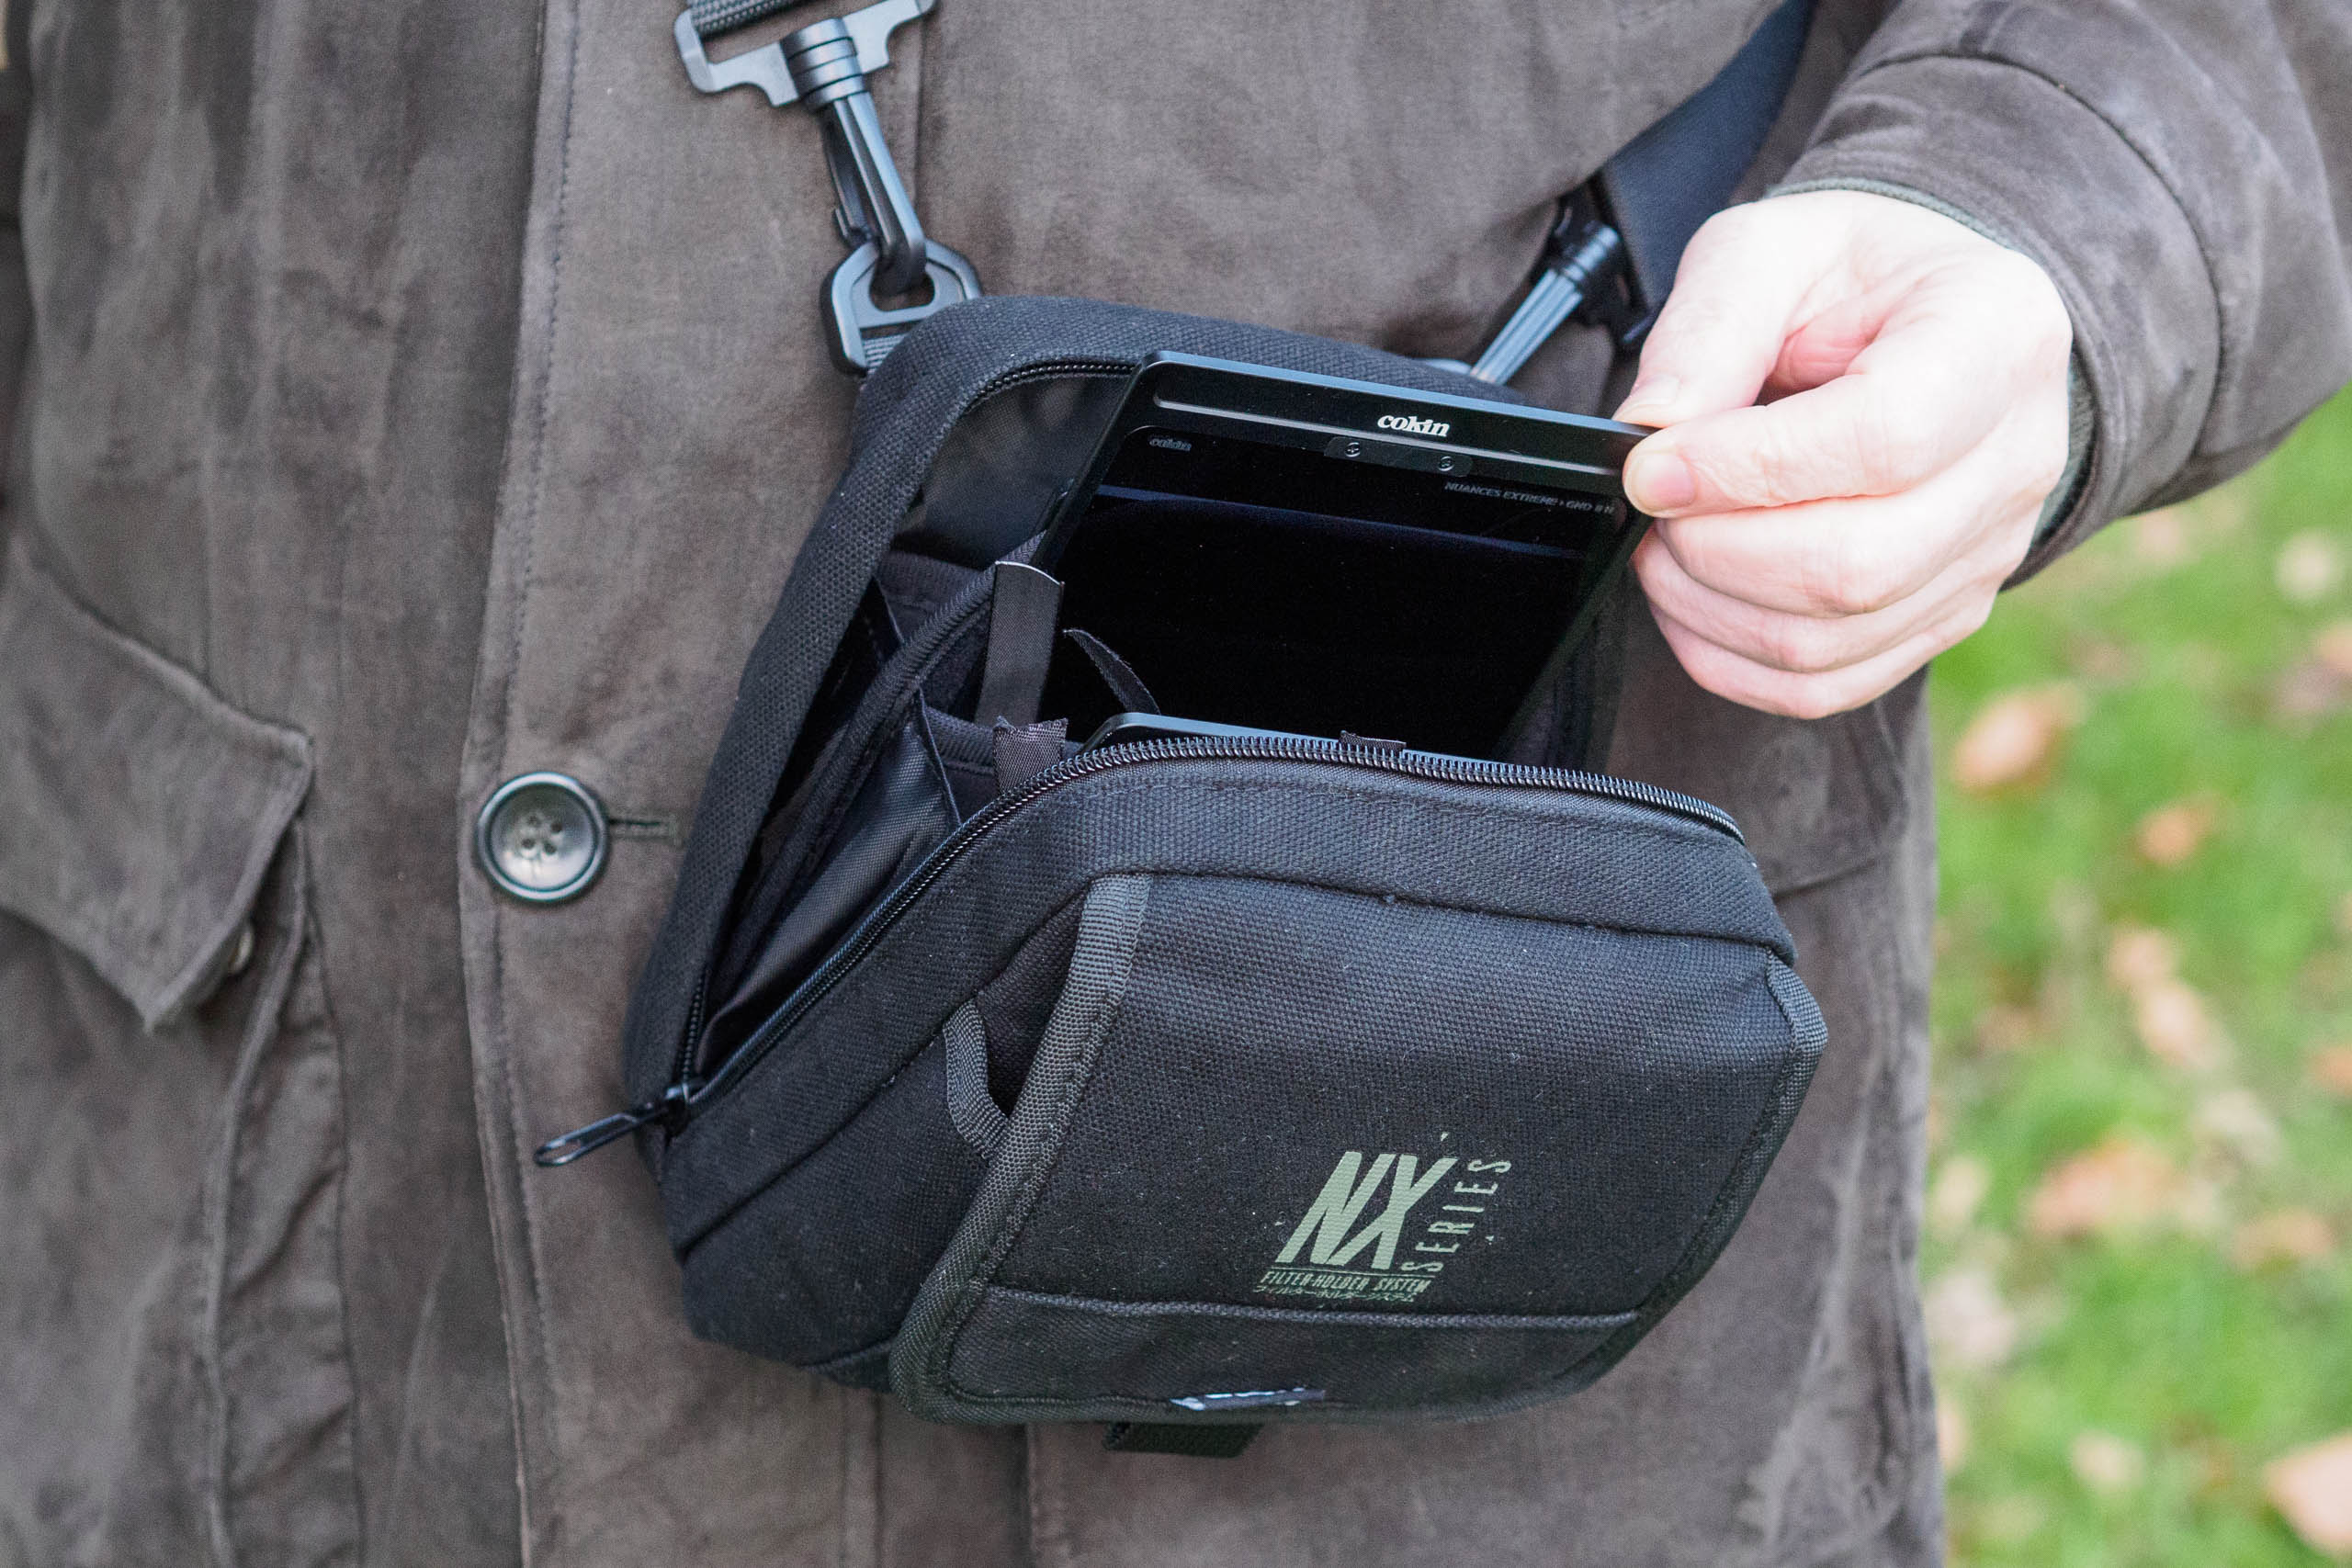 Cokin NX Series carry case in use